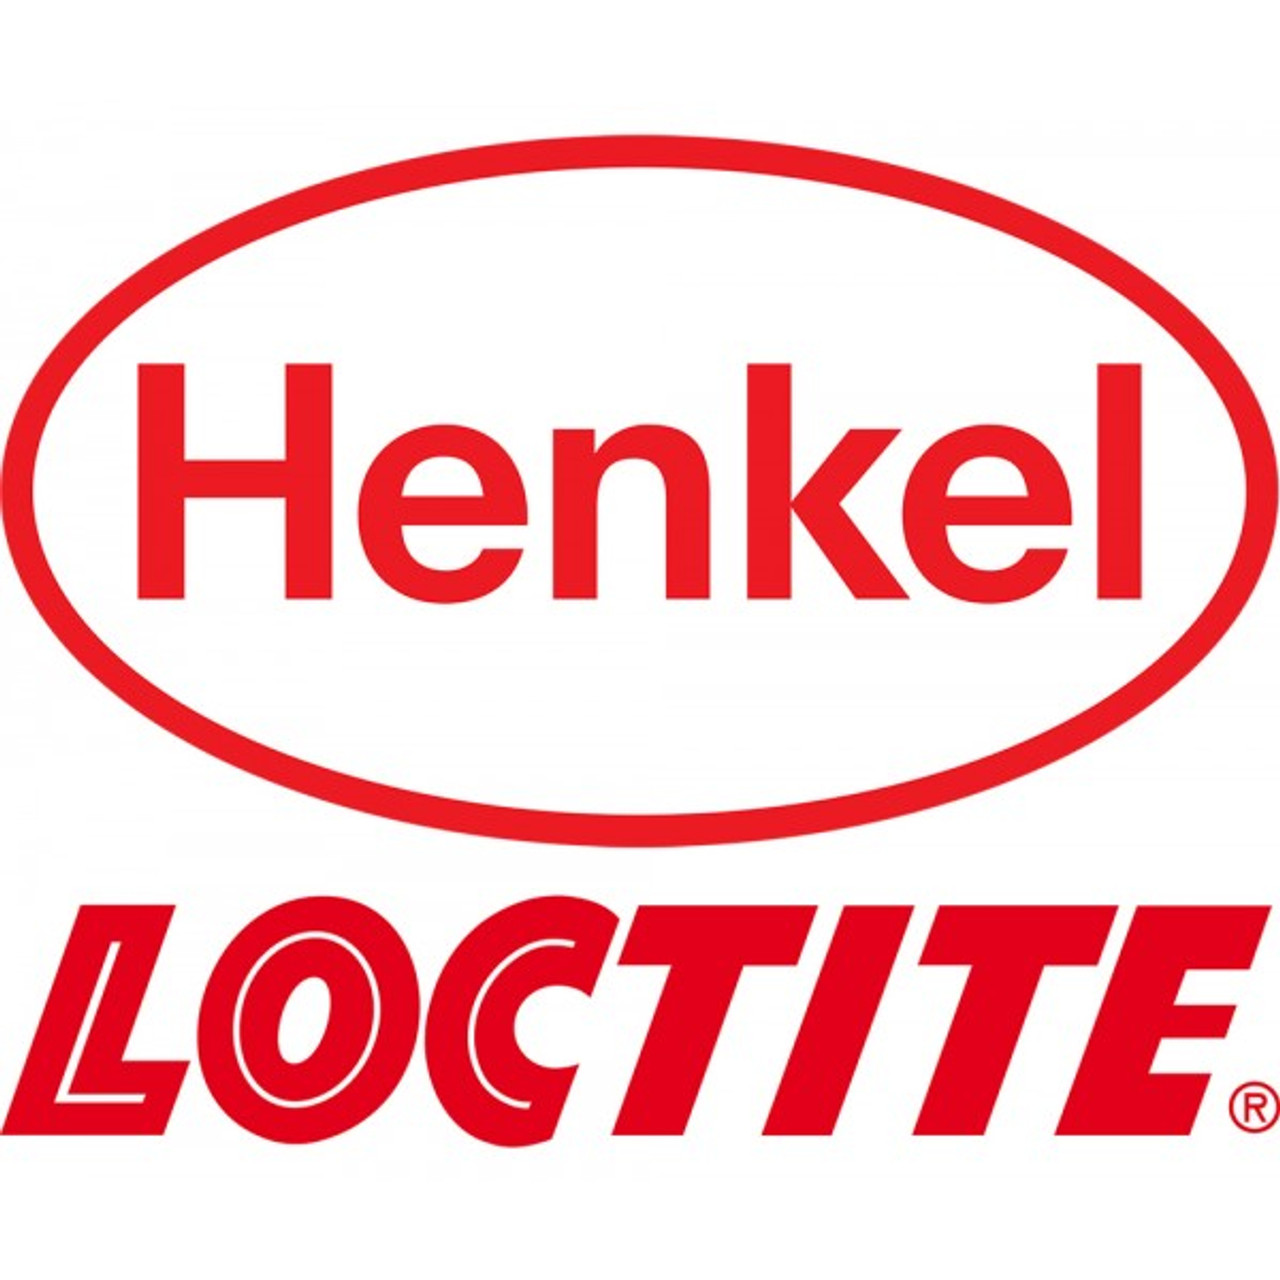 LOCTITE 545 - Thread Sealant - High-lubricity thread sealant for locking  and sealing hydraulic and pneumatic fittings - Henkel Adhesives